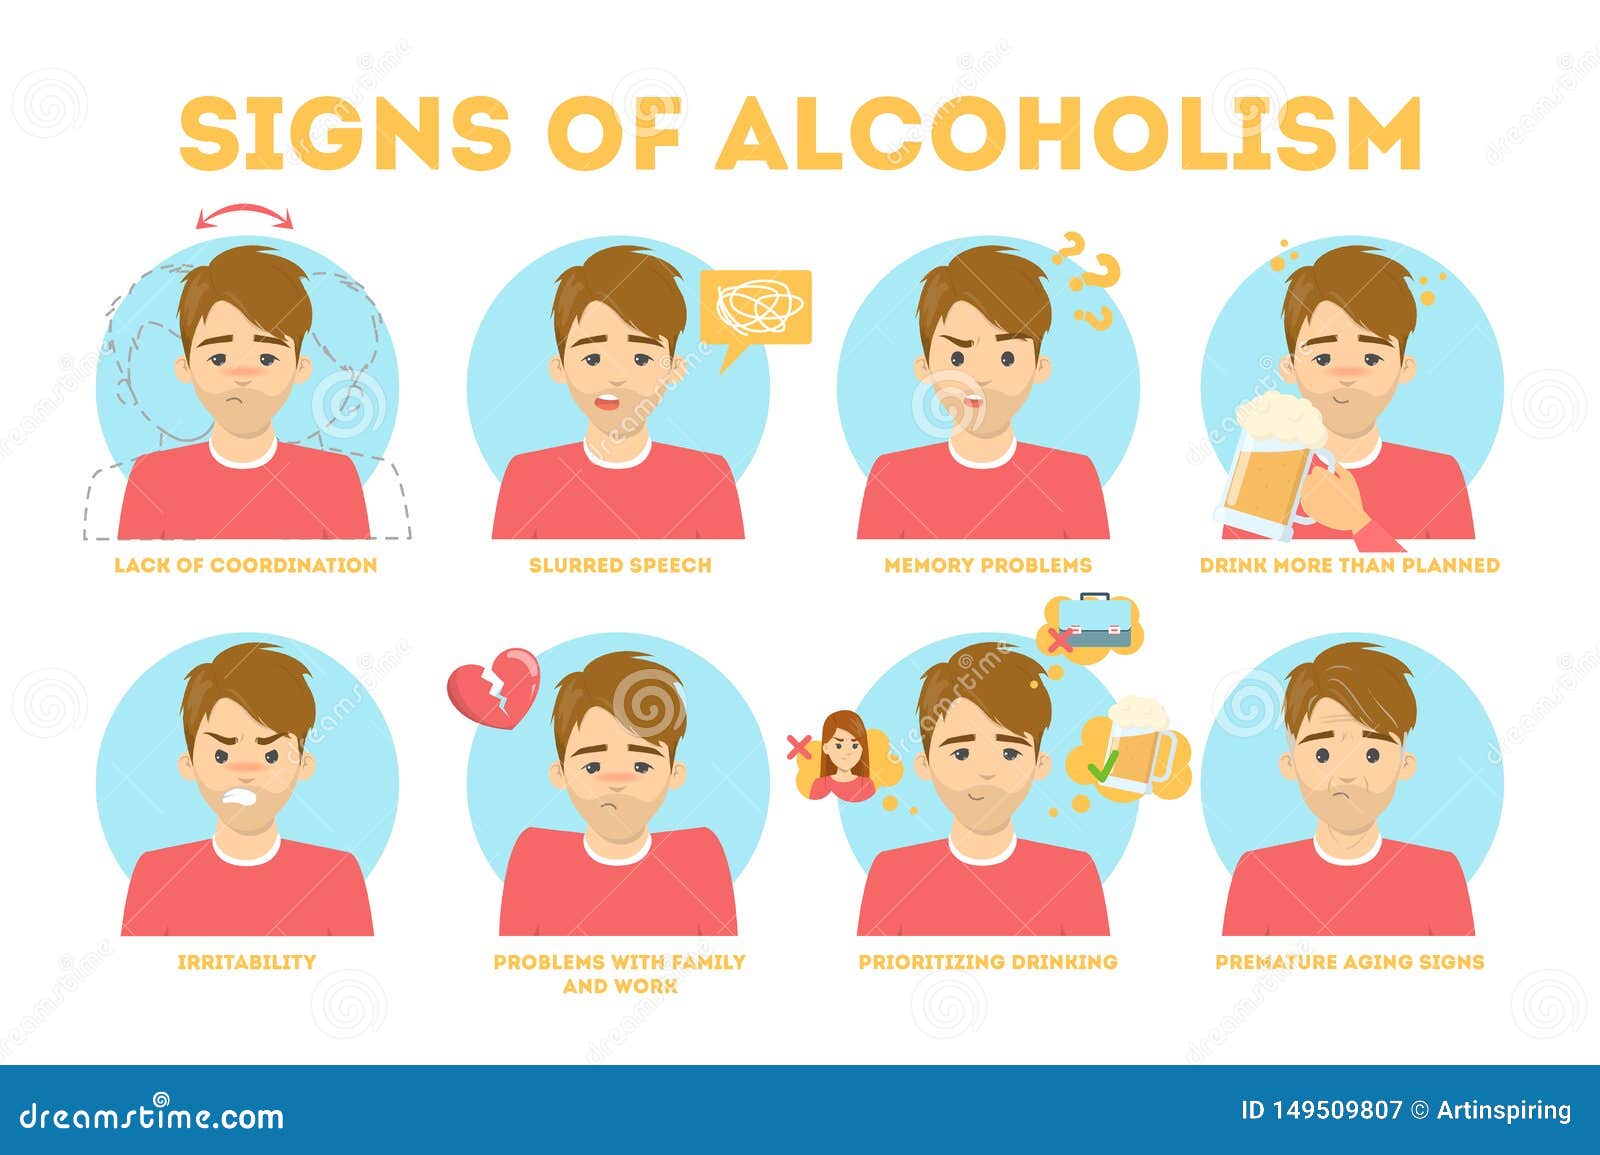 Alcohol Addiction Symptoms Danger From Alcoholism Infographic Stock All In One Photos 